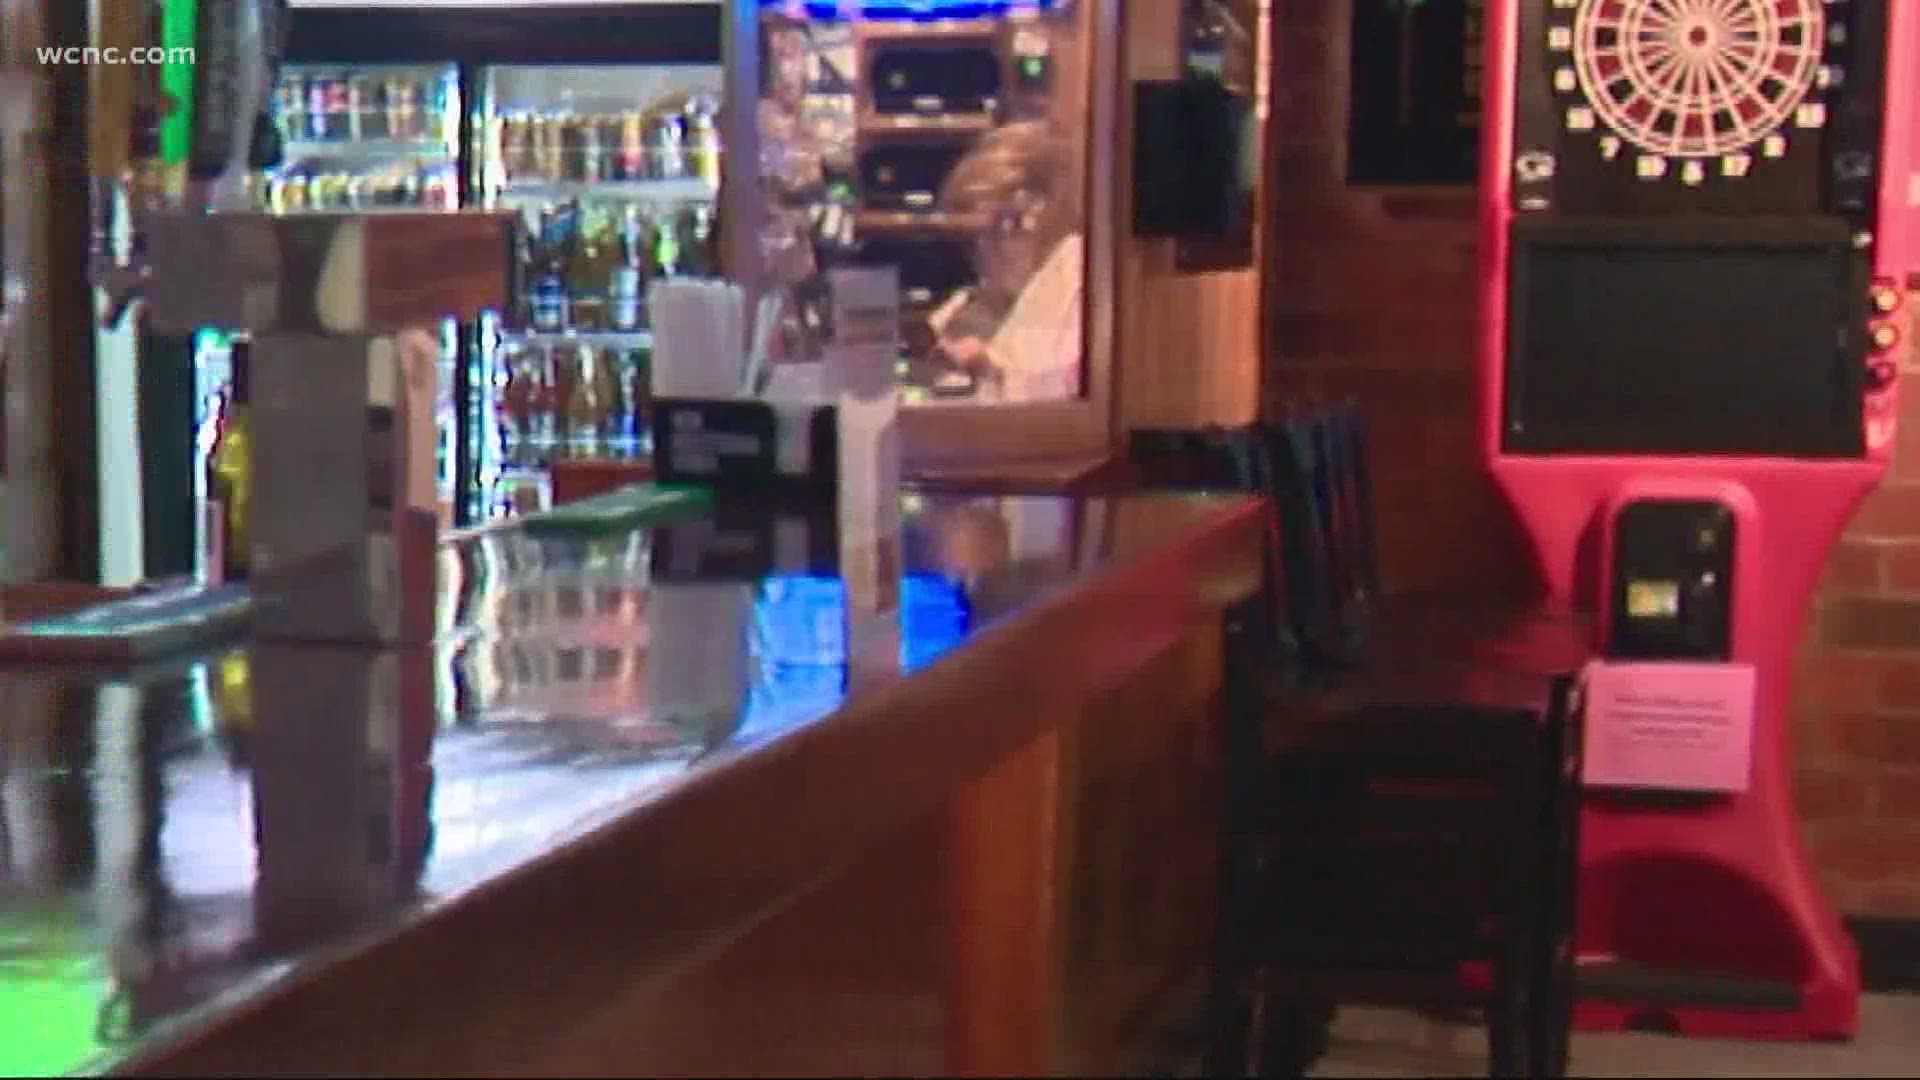 What this new alcohol restriction means for businesses